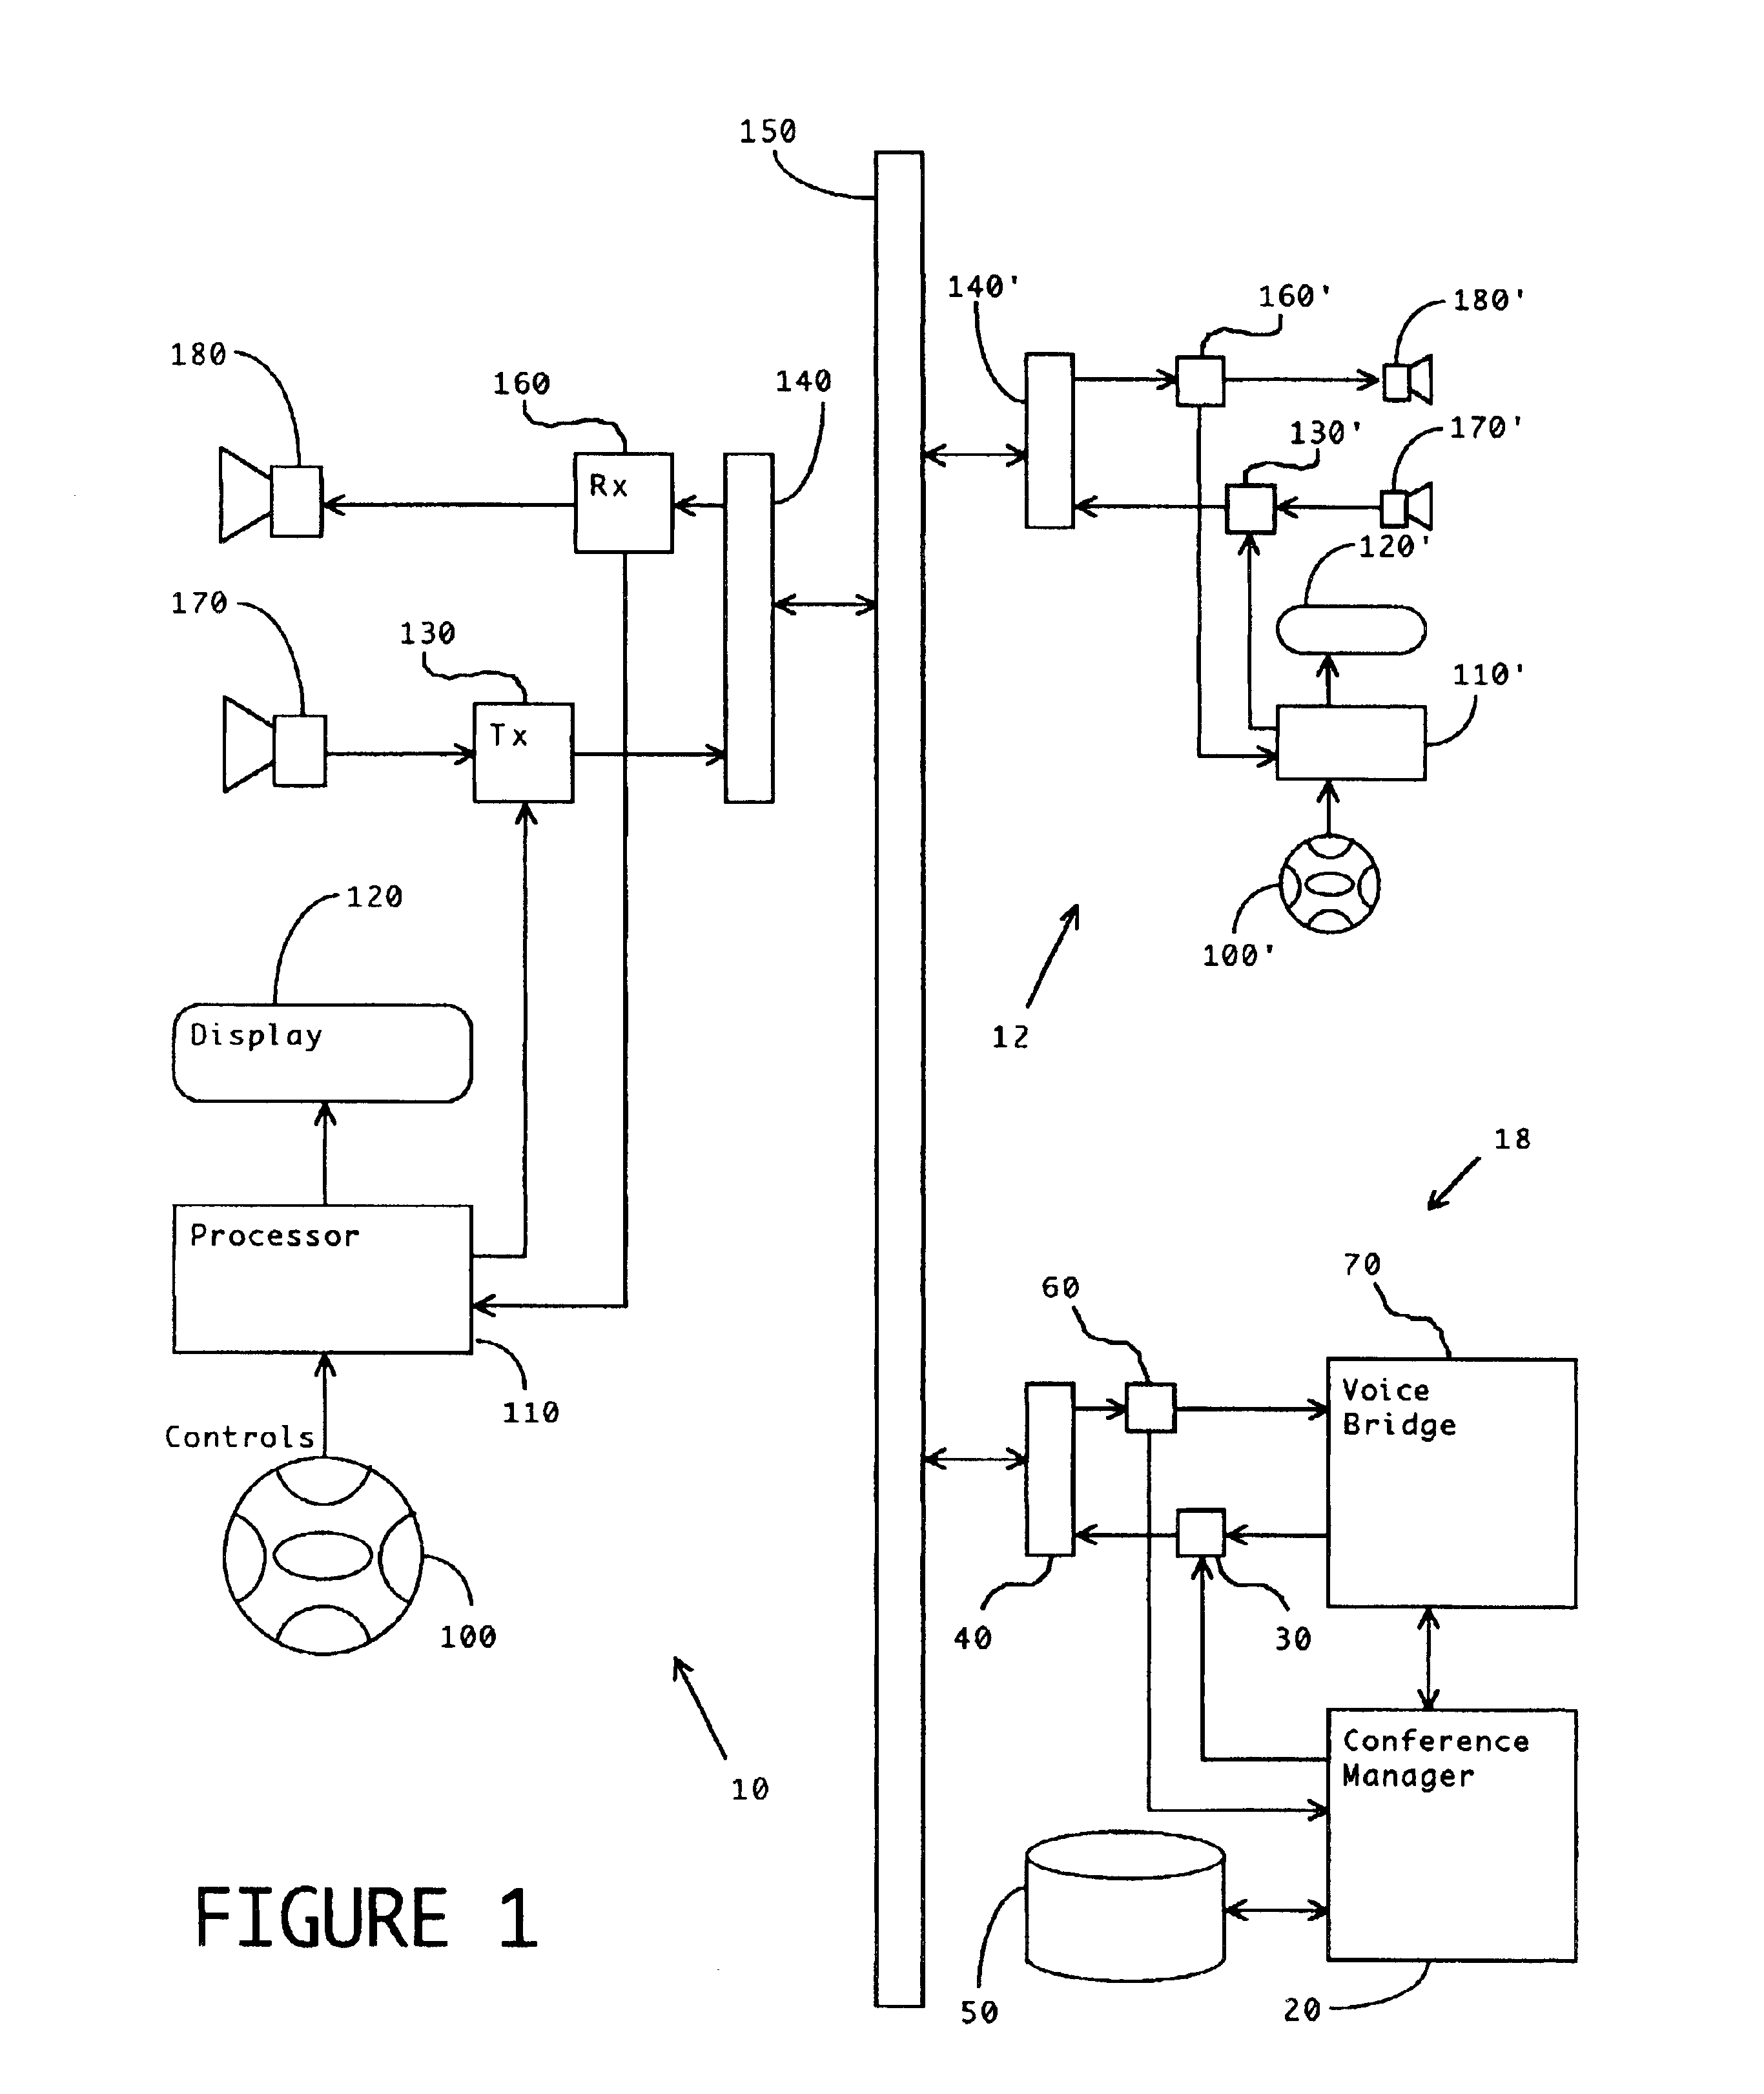 Method and apparatus for improved conference call management